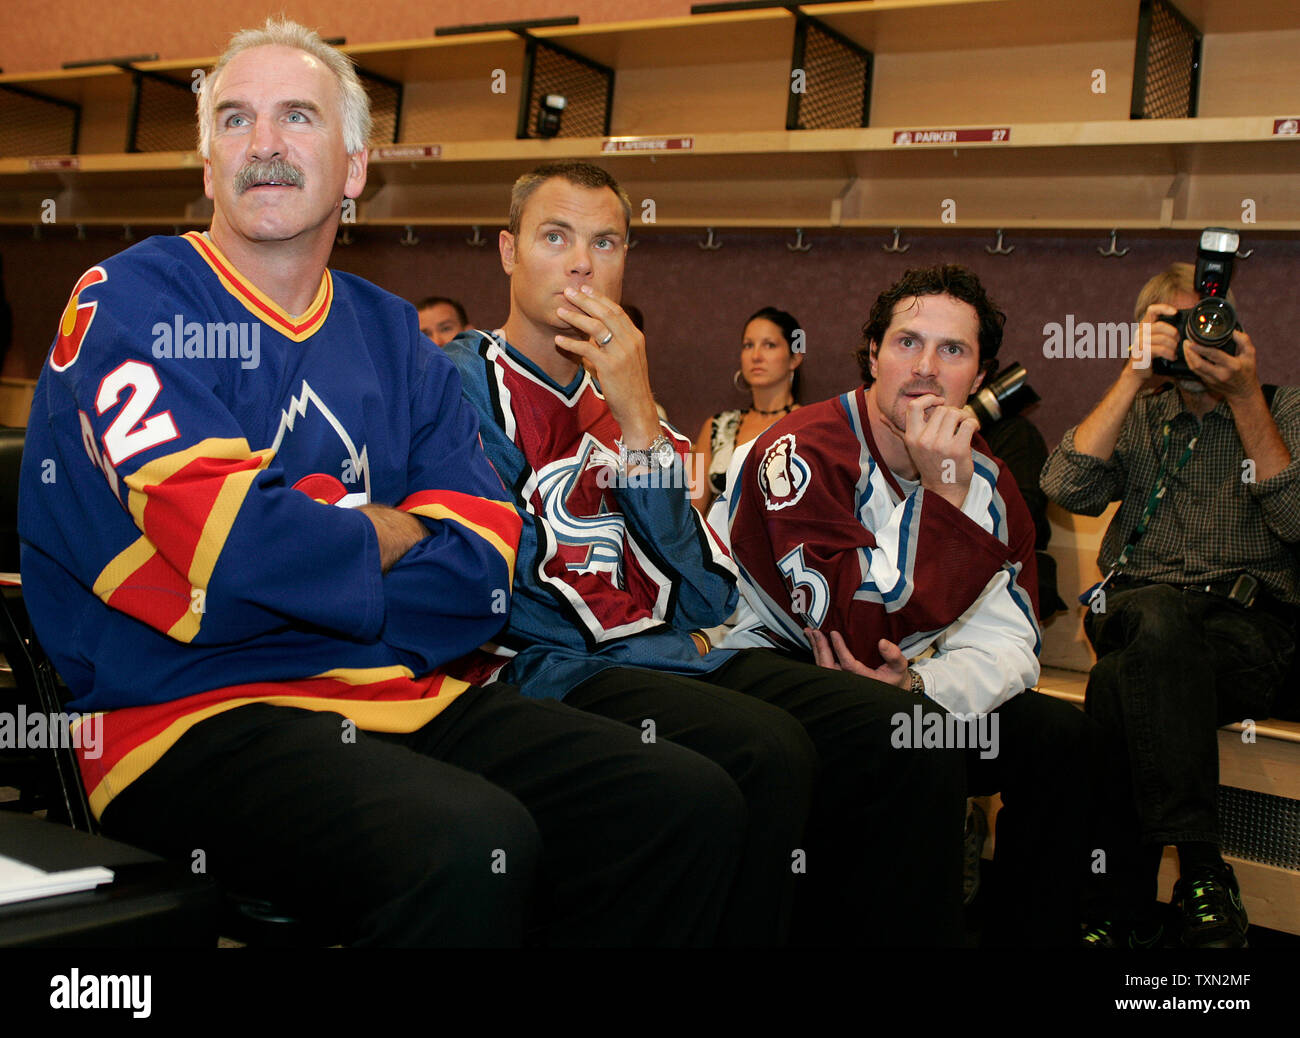 (L-R) Colorado Avalanche head coach Joel Quenneville, former Avalanche Curtis Leschyshyn, and Avalanche forward Milan Hejduk watch the unveiling of the new Avalanche uniform during a press conference at the Pepsi Center in Denver on September 12, 2007.  Quenneville, Leschyshyn, and Hejduk each wore a previous generation of hockey jersey for the presentation.   The new uniforms by Reebok will improve player performance and safety.  (UPI Photo/Gary C. Caskey) Stock Photo